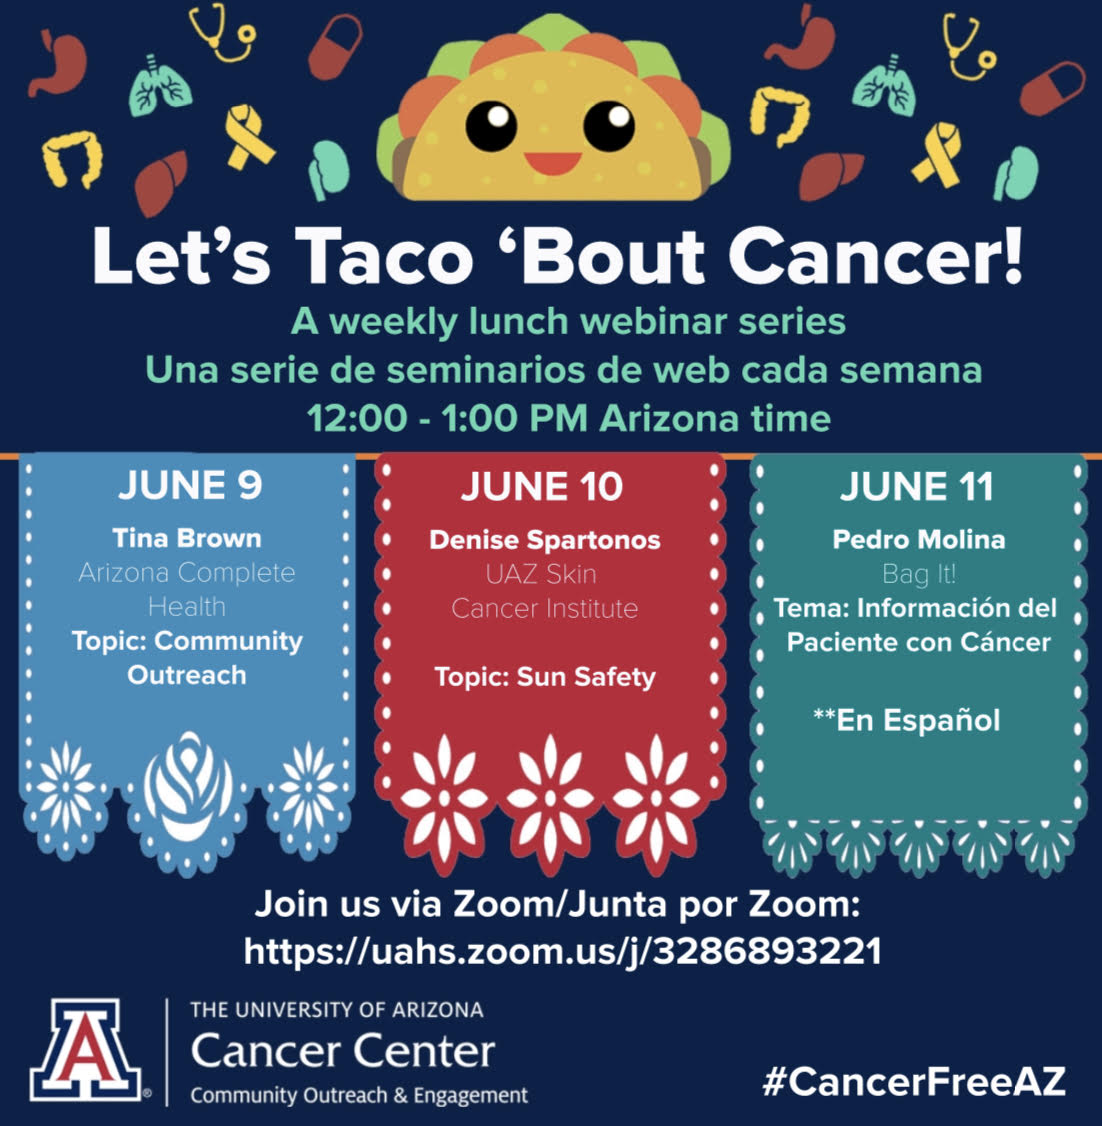 Arizona Cancer Center is hosting a weekly lunch webinar series called Let's Taco 'Bout Cancer! Check out the schedule and join in via Zoom today and tomorrow, and on Thursday when you can hear more about Bag It! uahs.zoom.us/j/3286893221 #CancerFreeAZ #FighttheFear #Cancer #hcsm